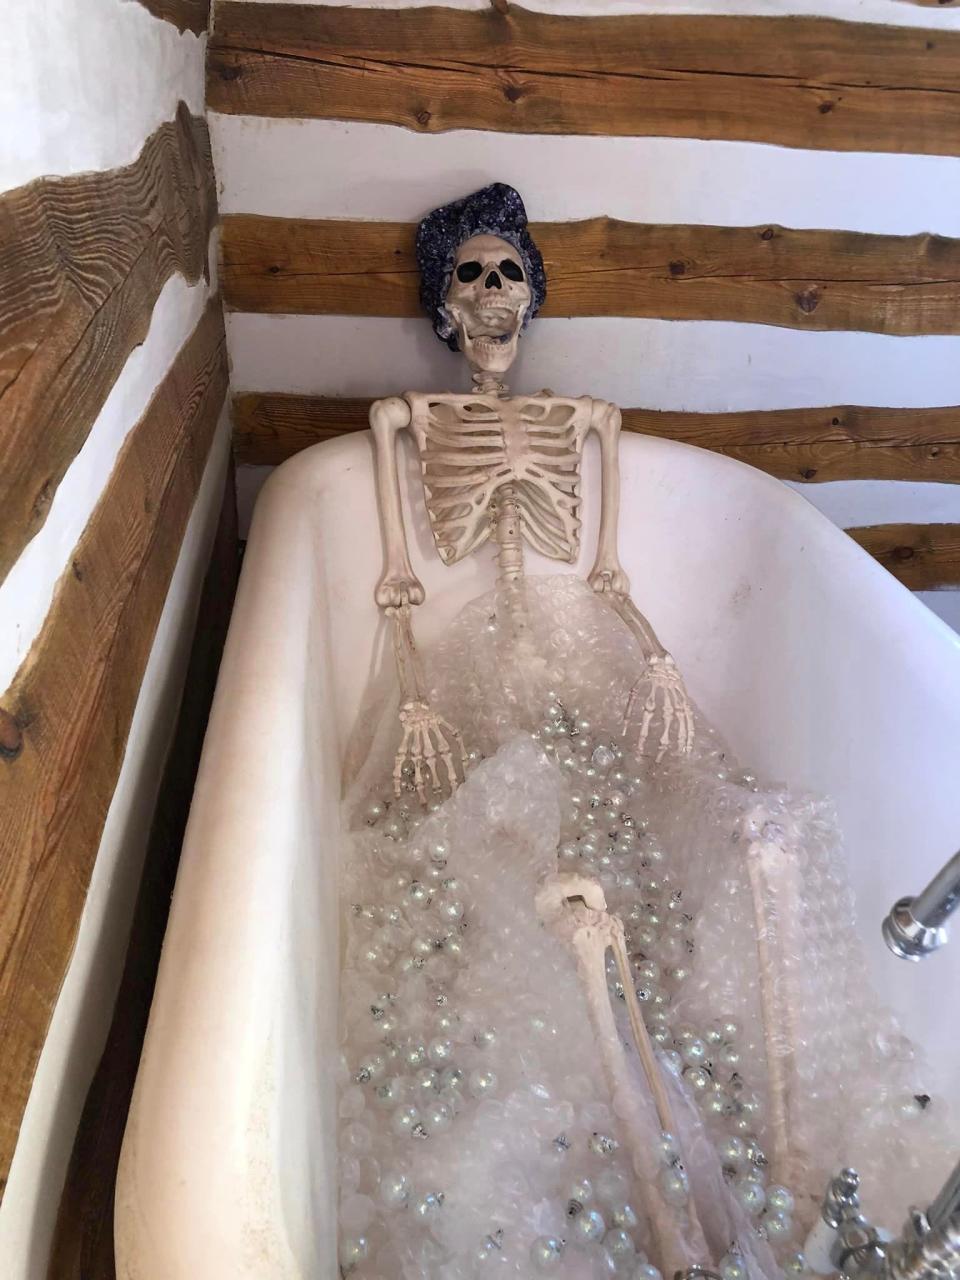 A skeleton relaxes in the Spooky Cabin at the 2022 Rassawek Autumn Festival.